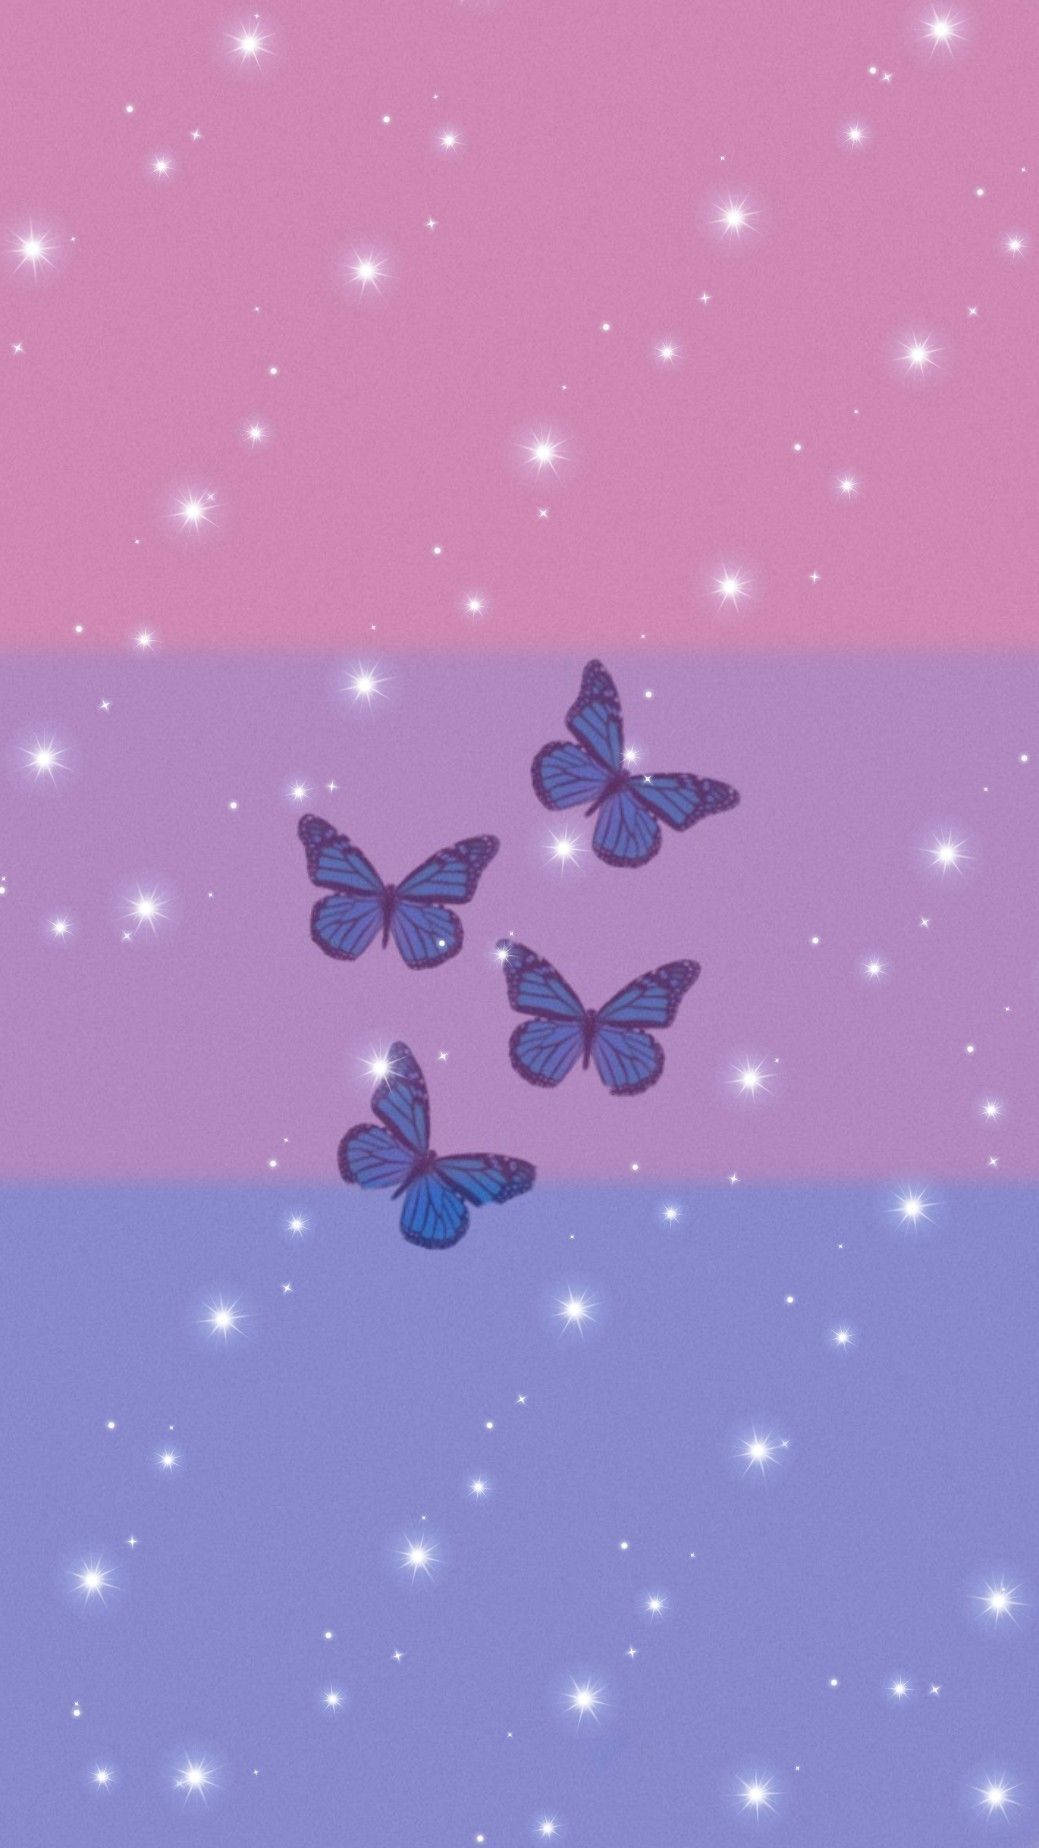 Bisexual Flag with Butterflies - Unity in Diversity Wallpaper